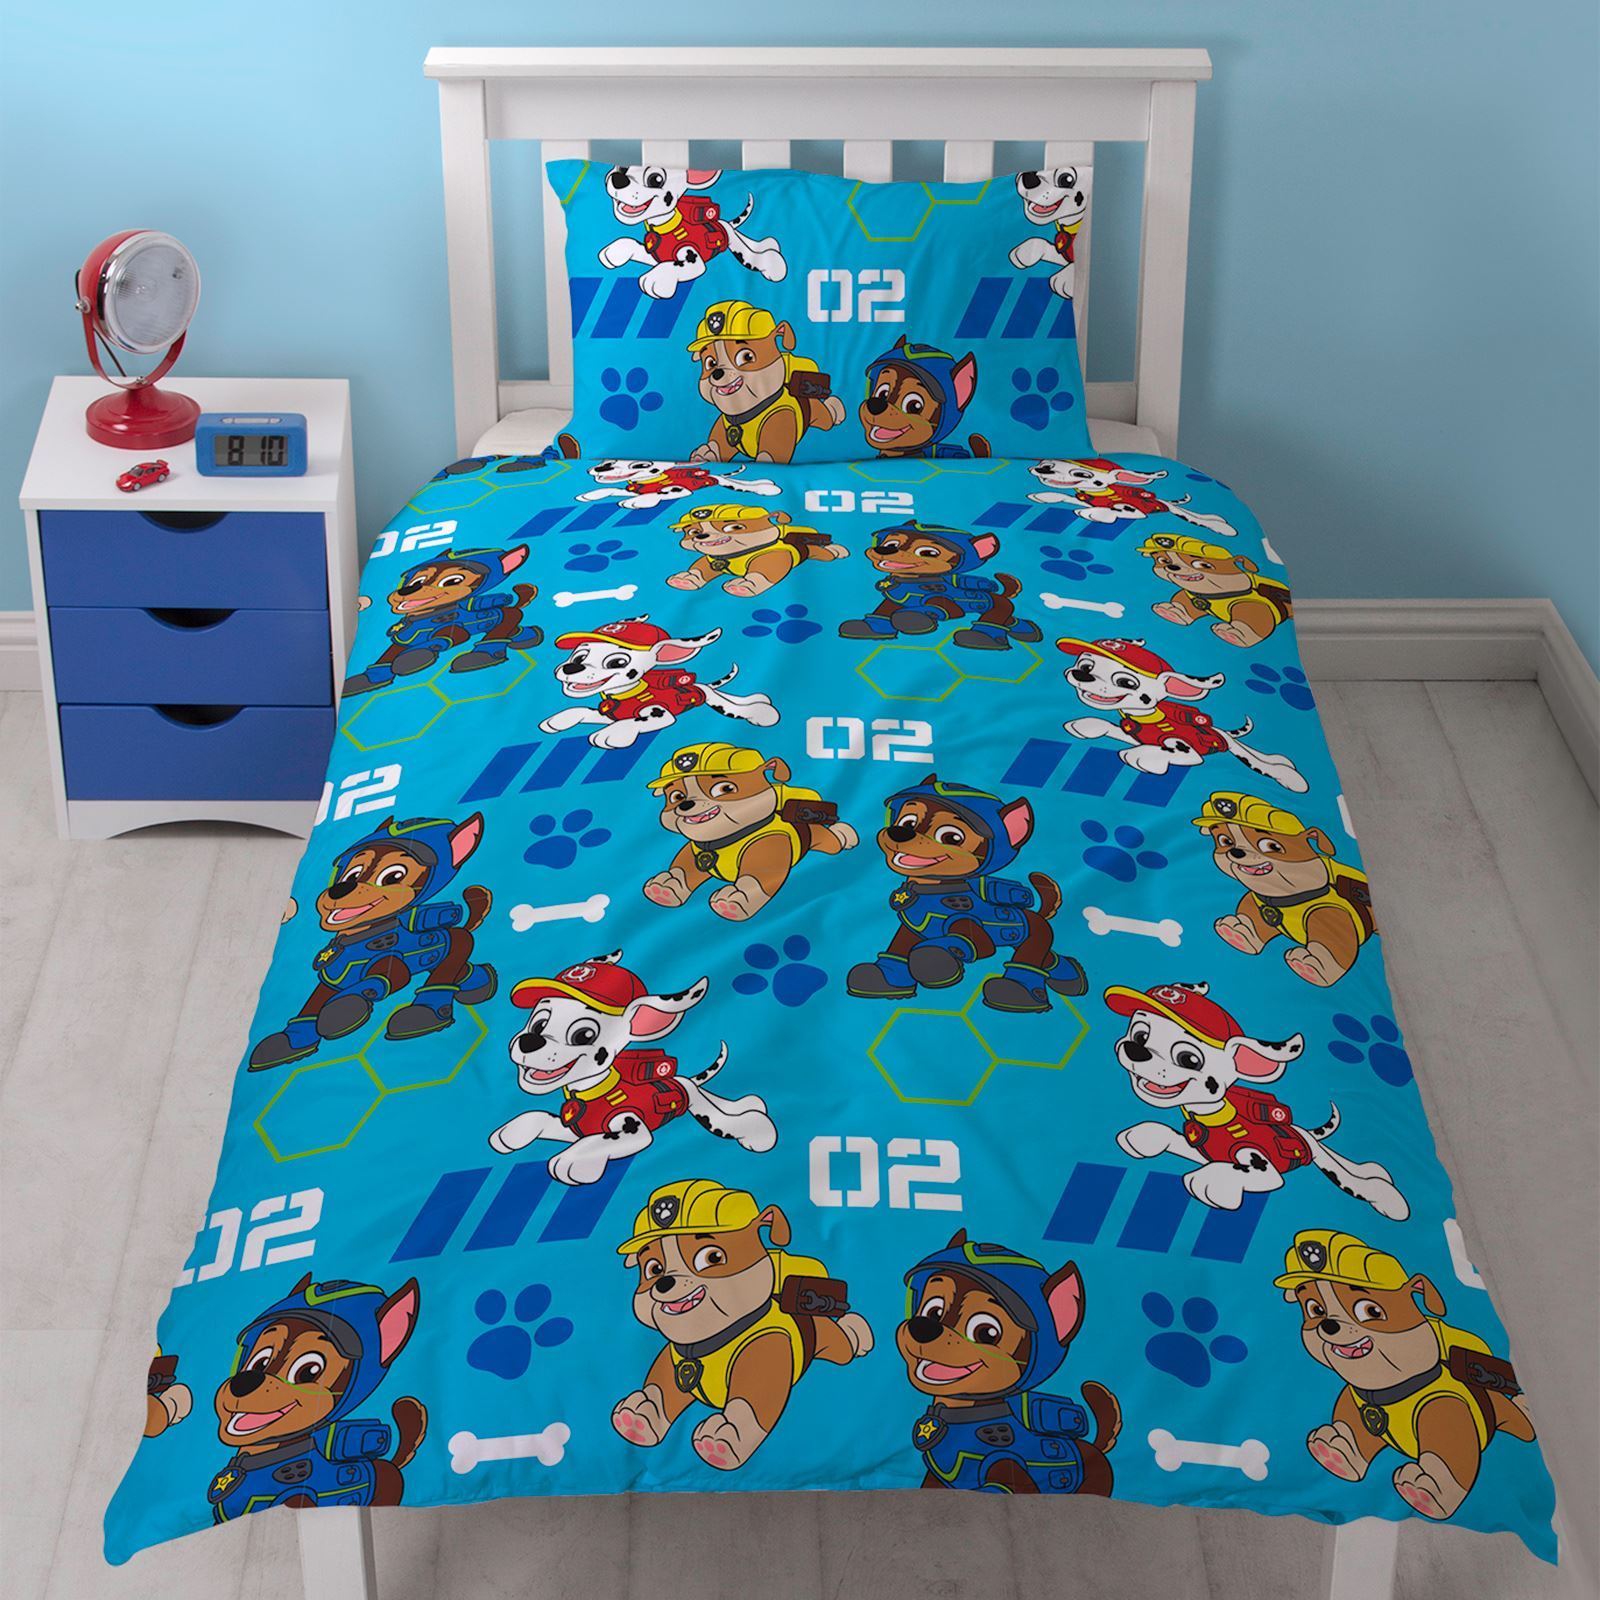 Paw Patrol 'Spy' Reversible Rotary Single Bed Duvet Quilt Cover Set